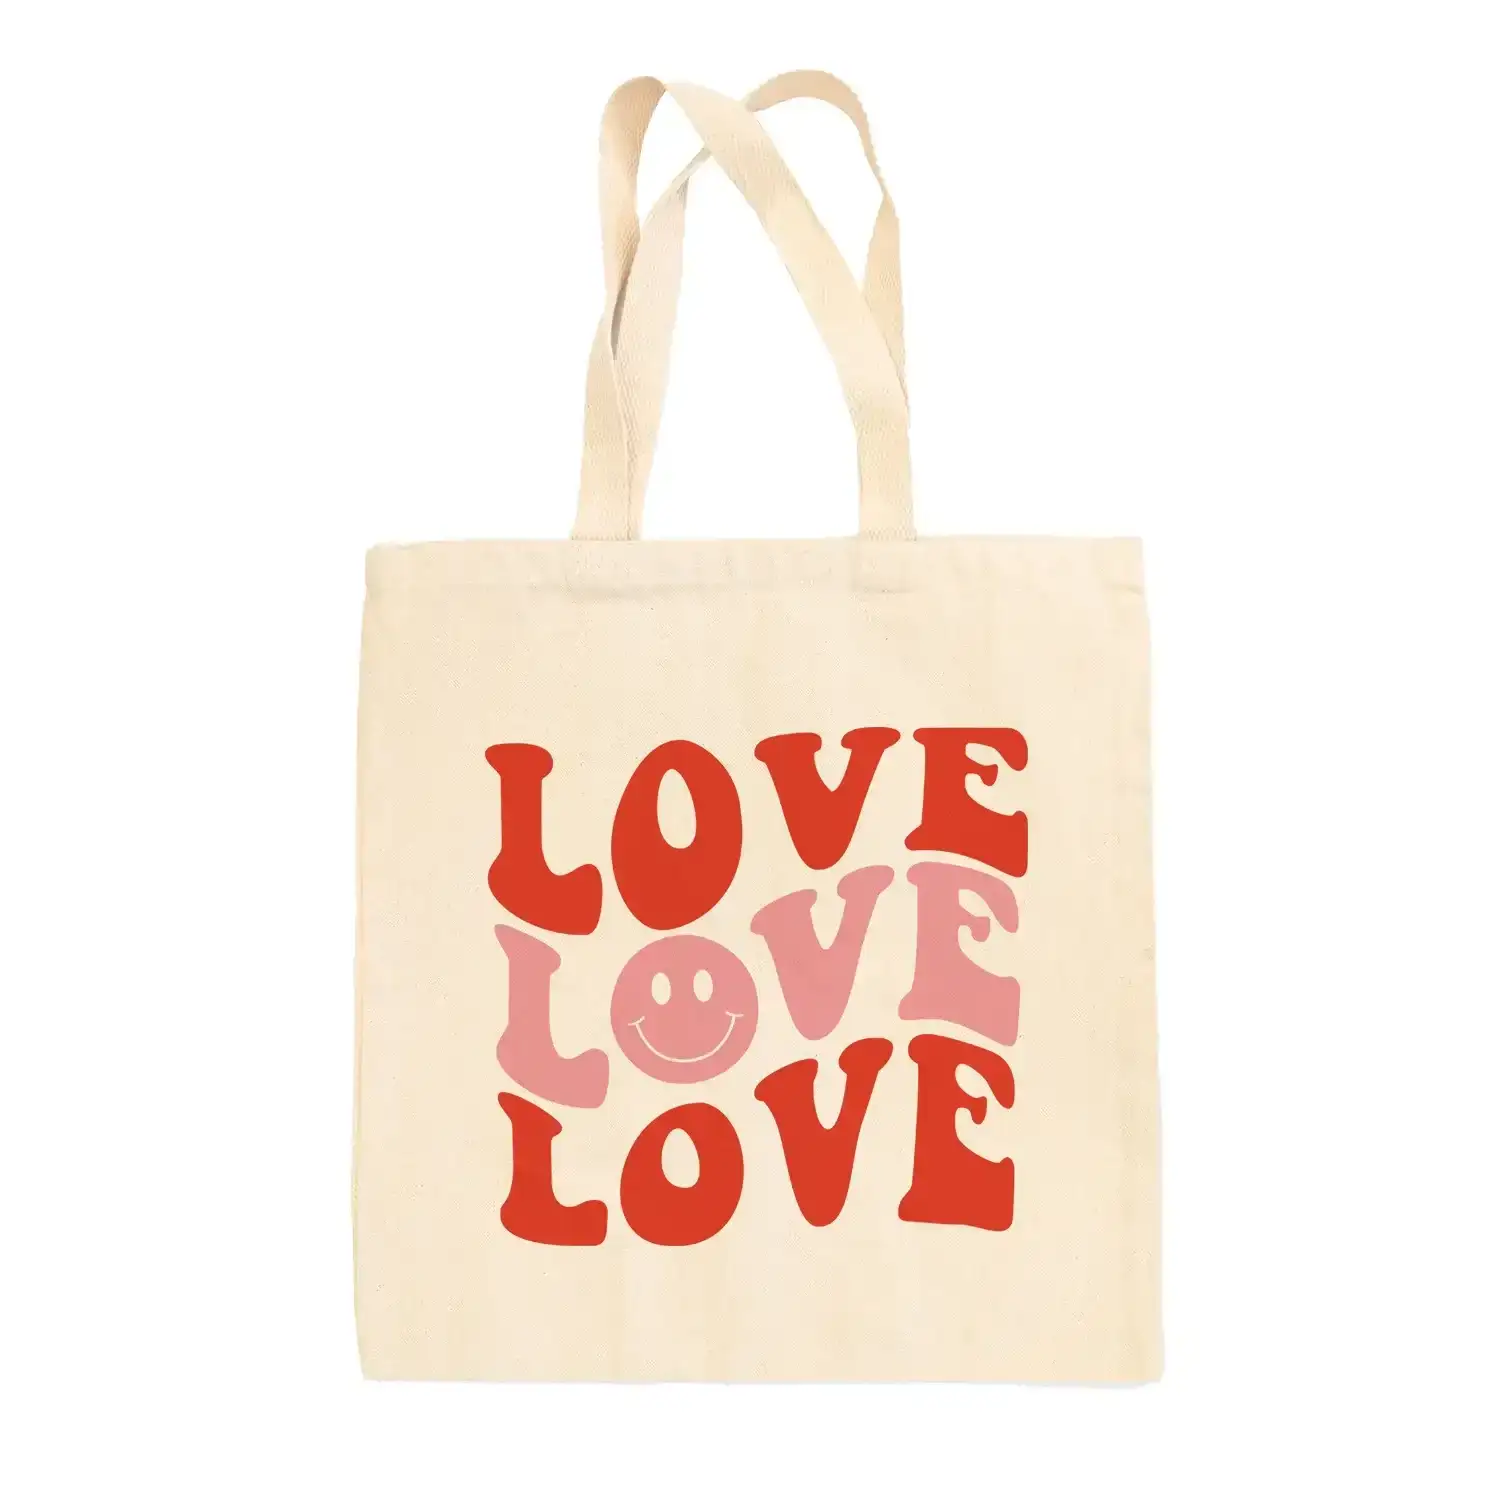 Image of Love (Repeated Smiley Face) Tote Bag